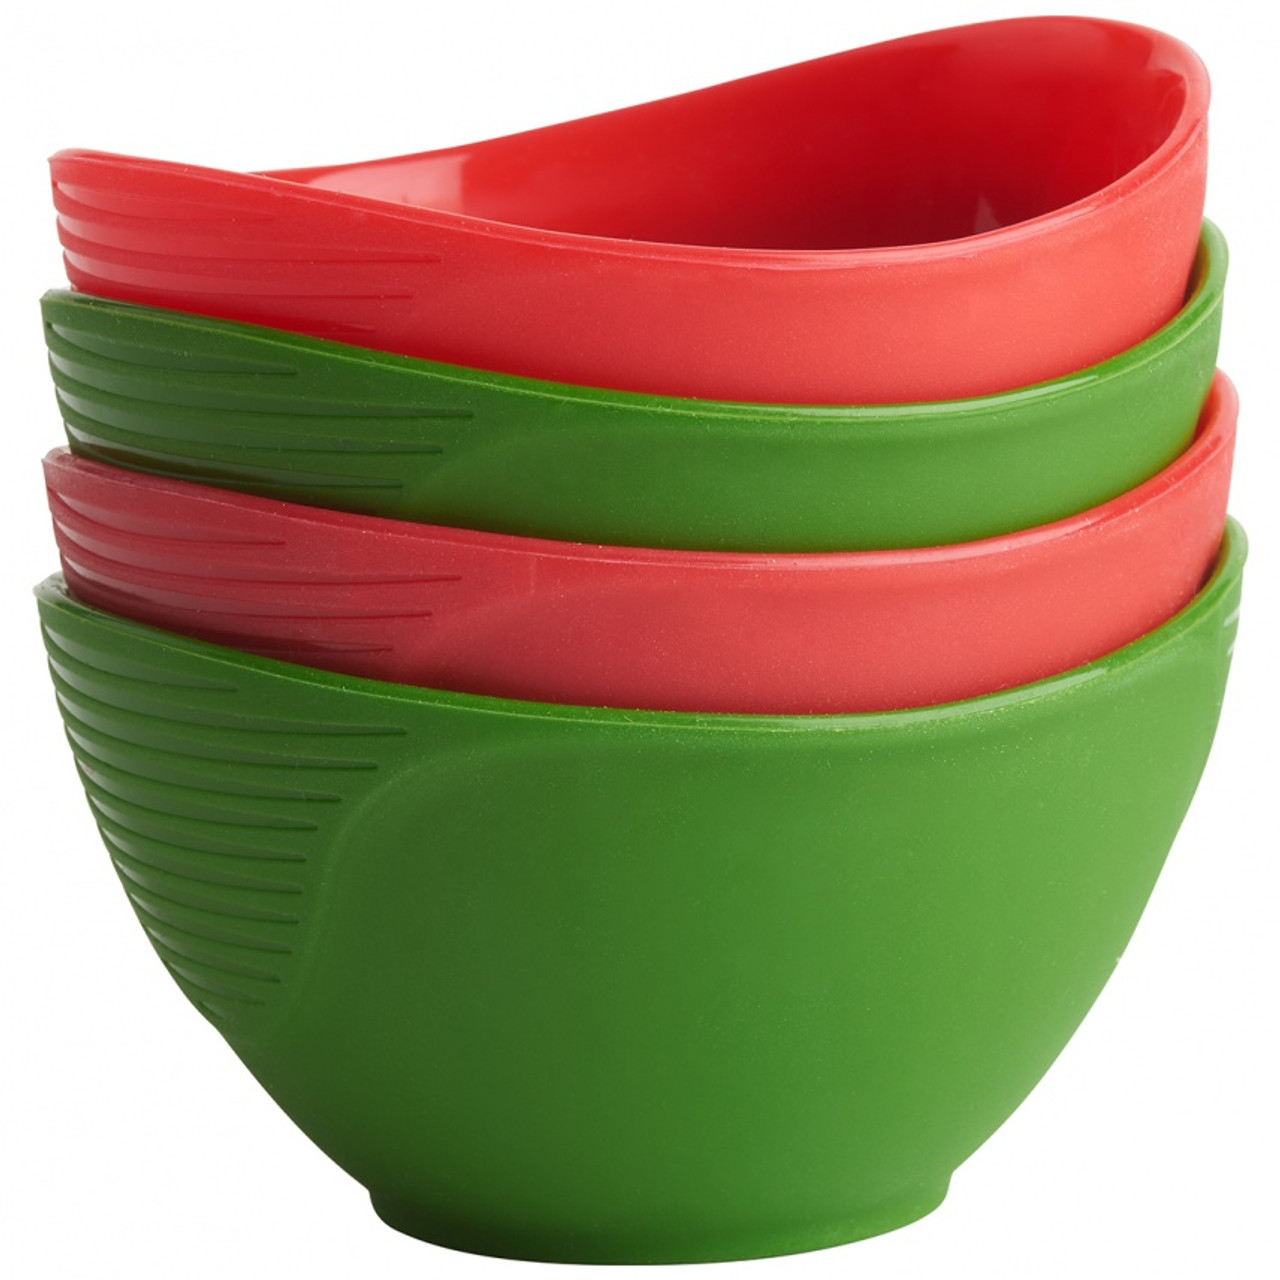 Trudeau Holiday Collection - Silicone Pinch Bowls - Set of 4 - Red and Green (TR 05117655)